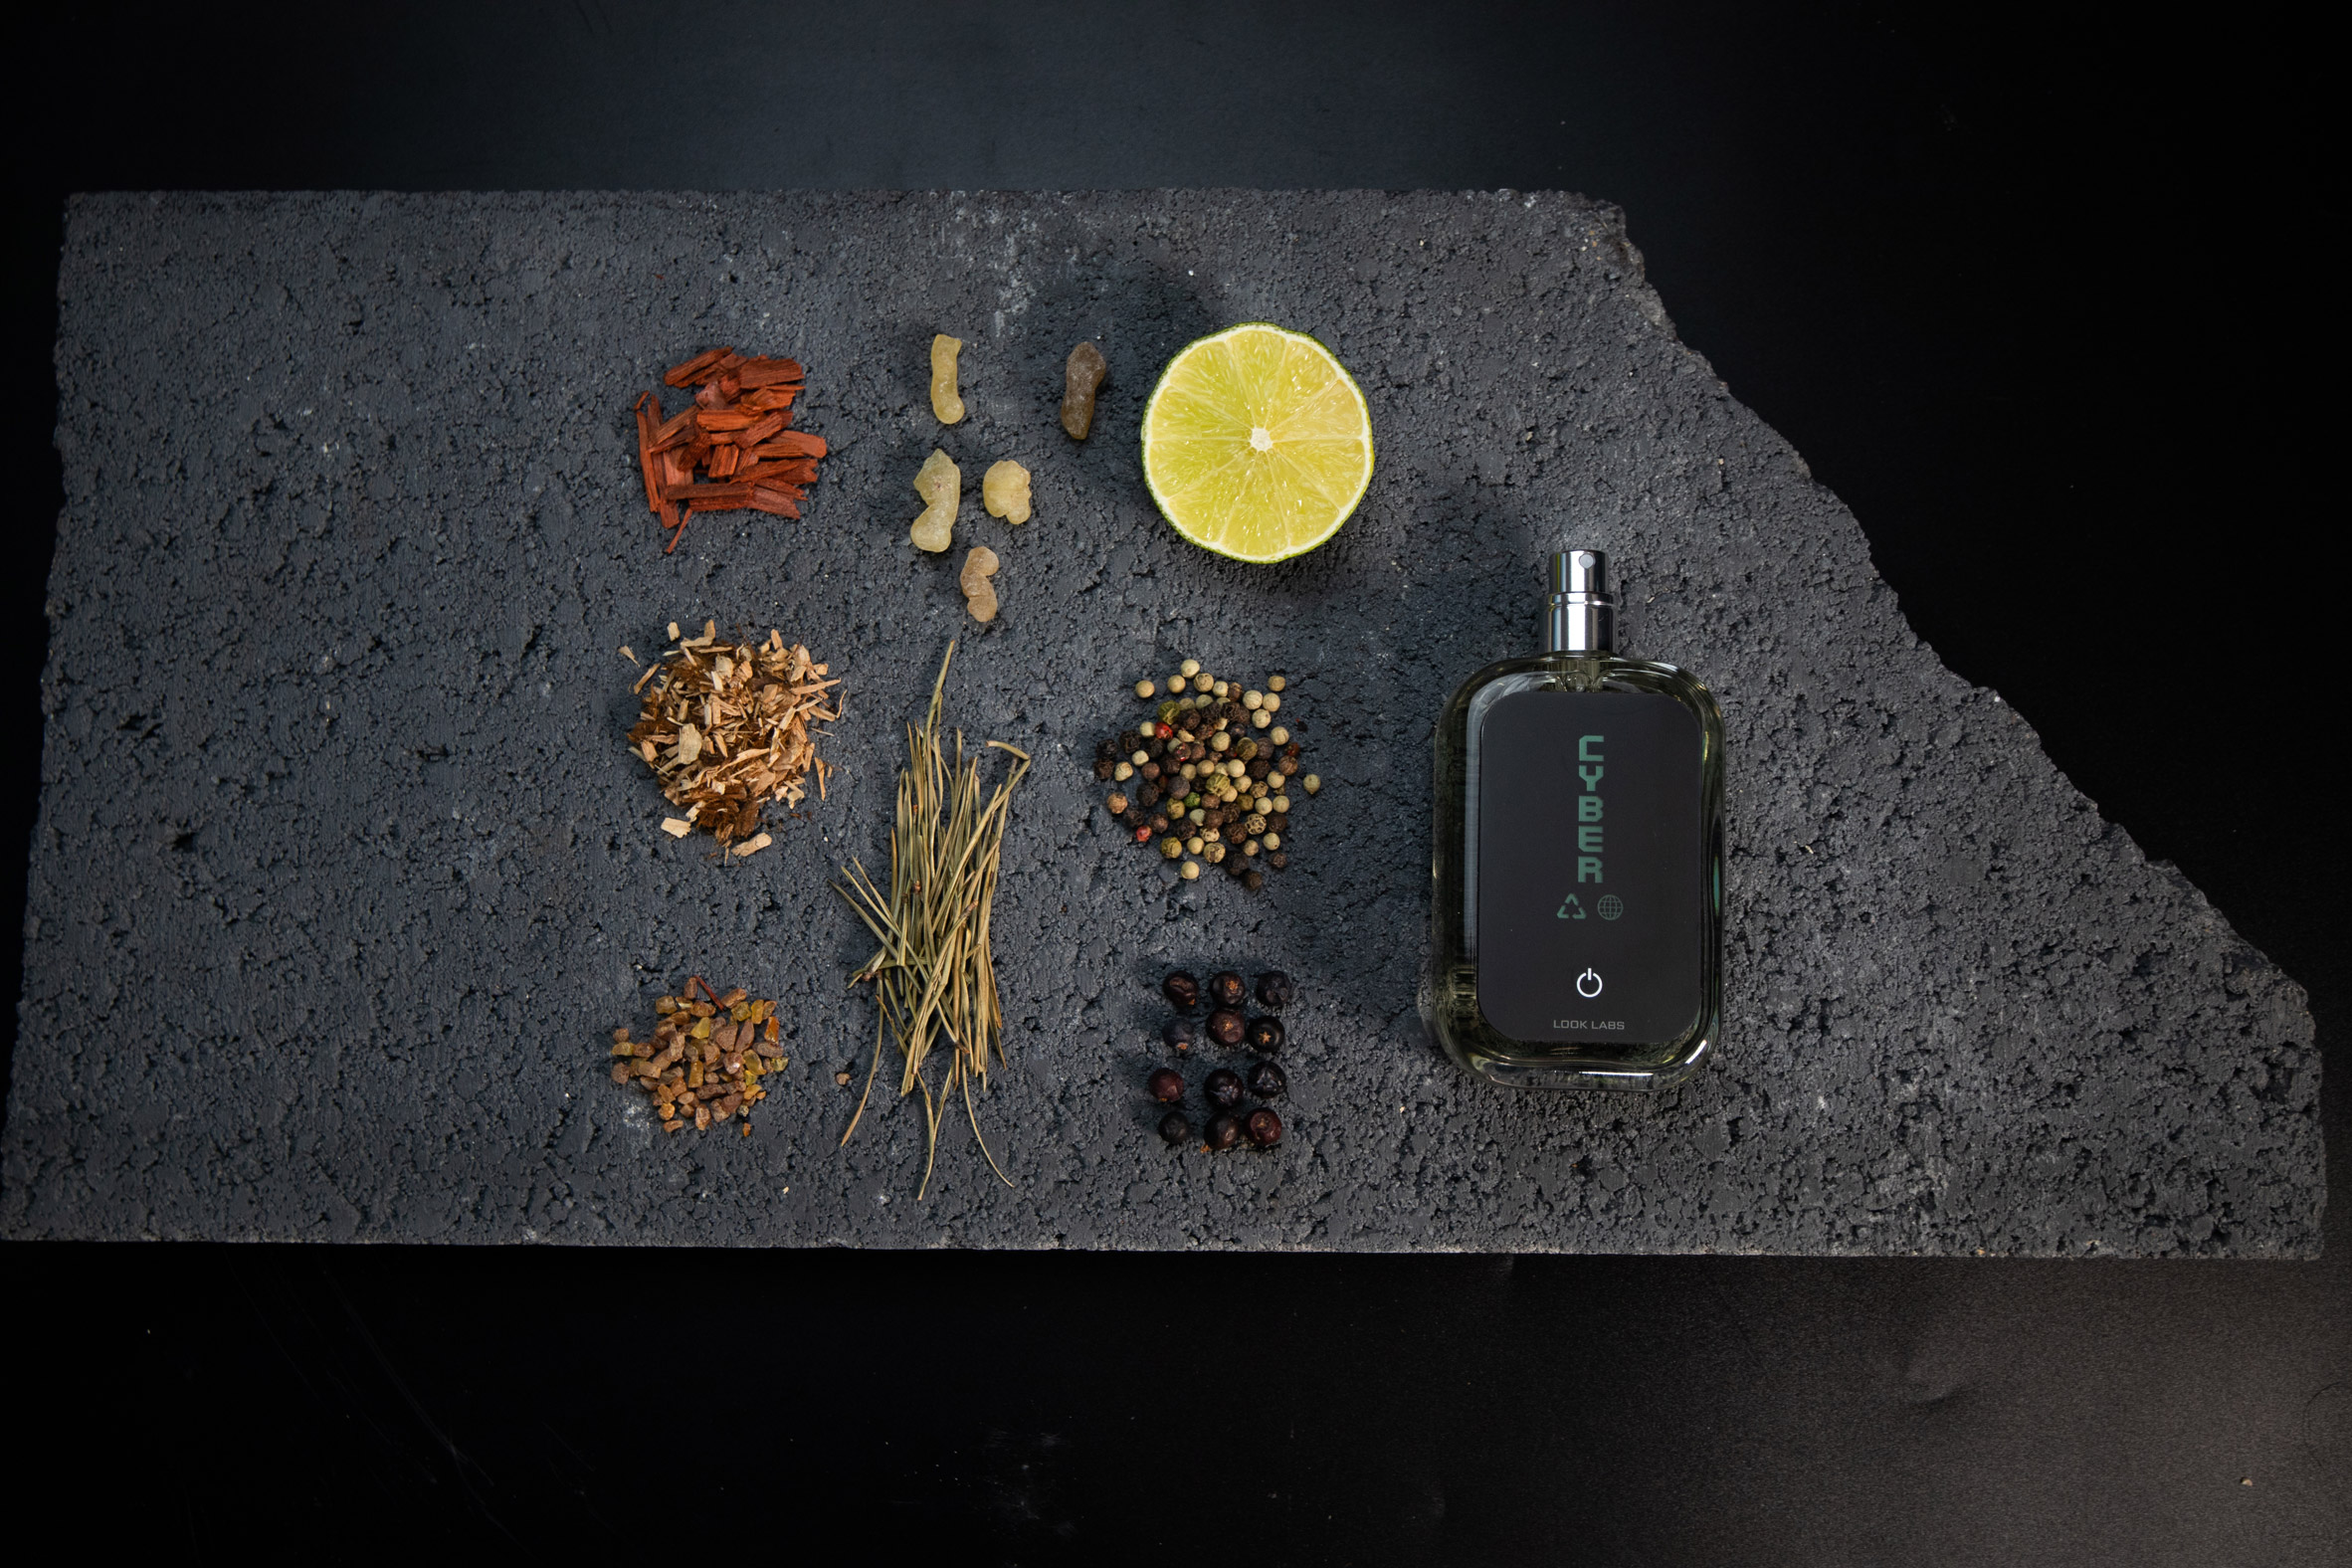 Ingredients of the fragrance by Look Labs